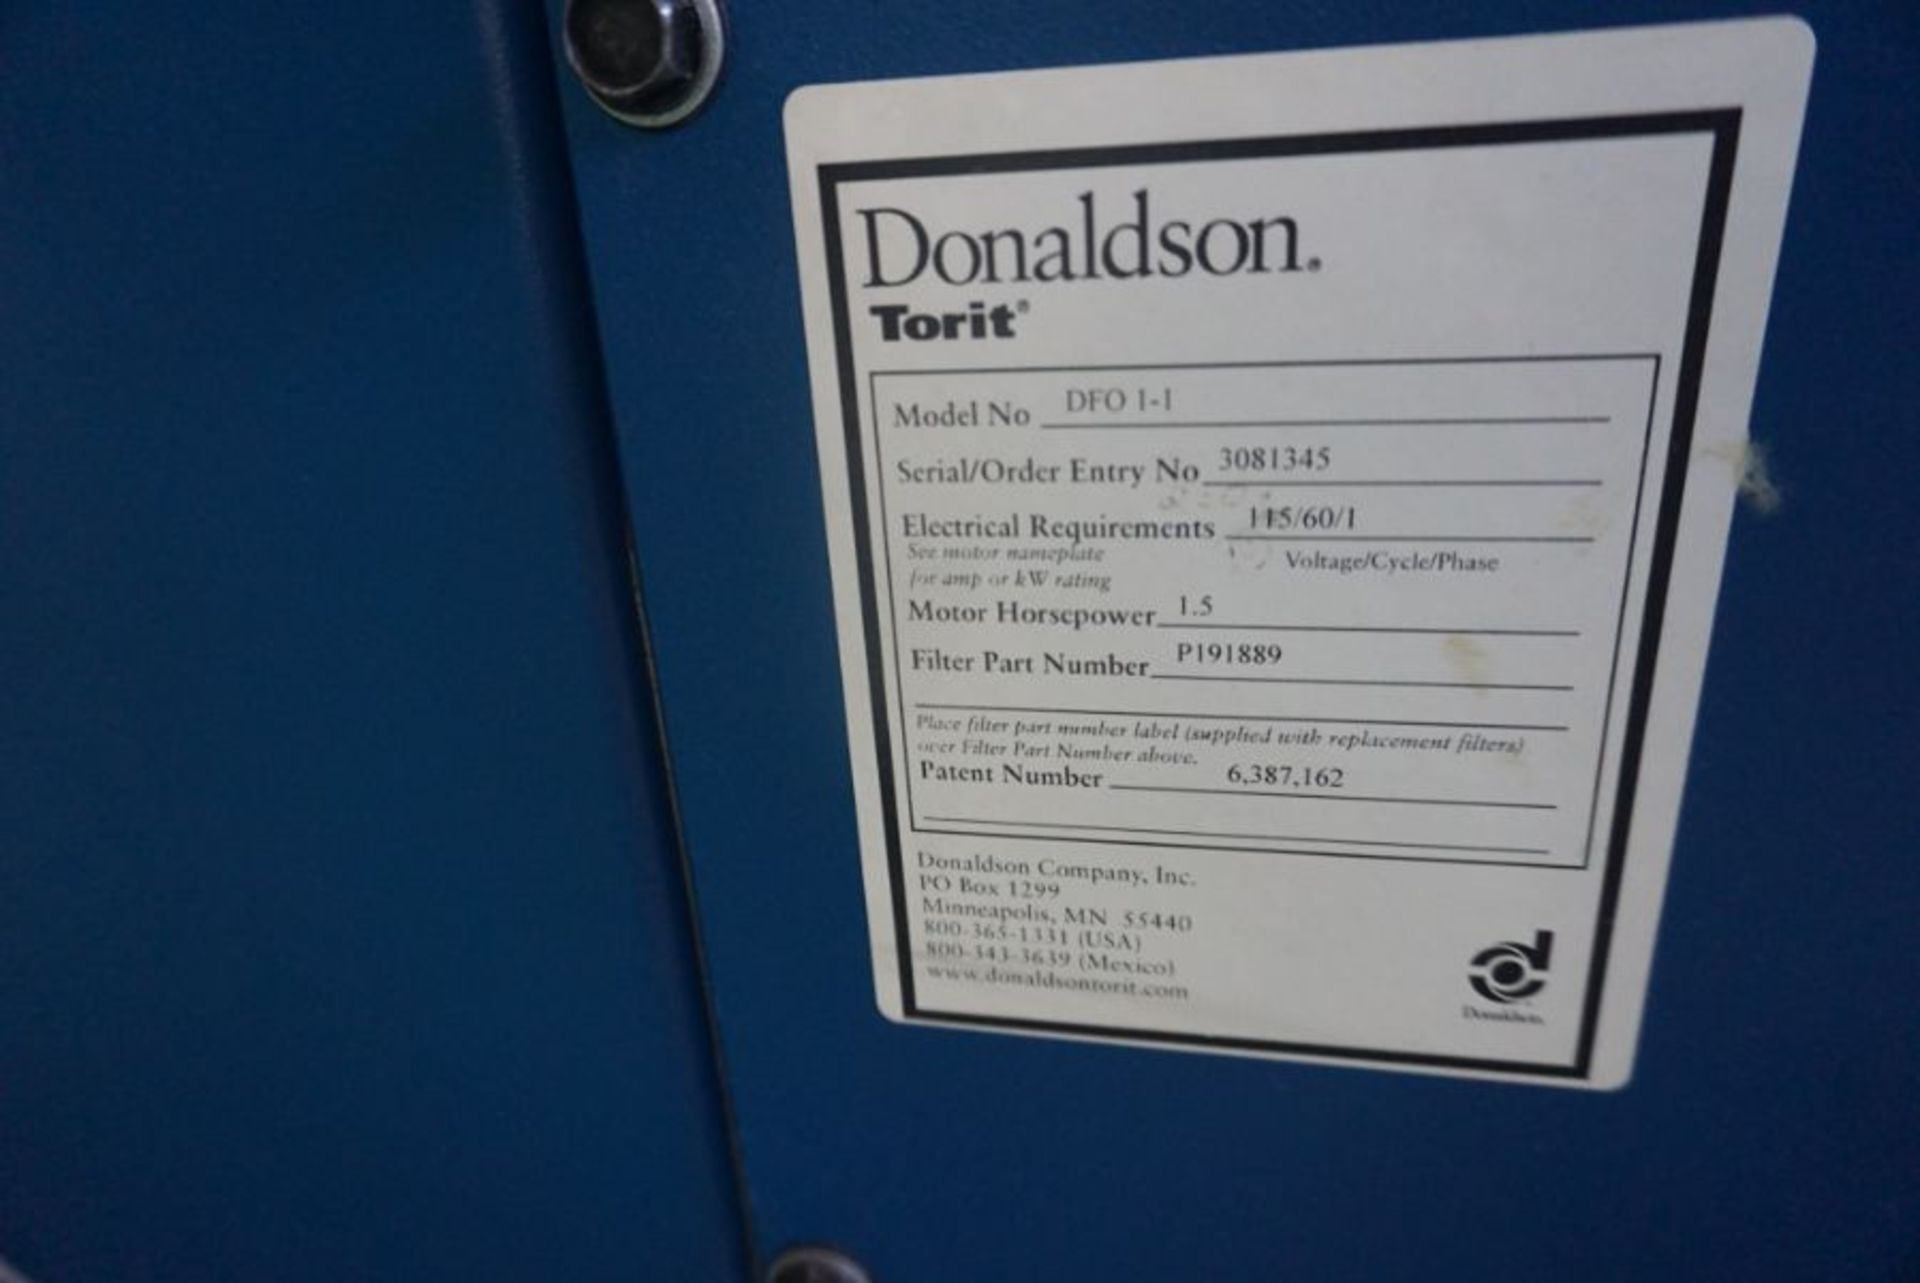 Donaldson DFO I-I Dust Collector, s/n 3081345 - Image 7 of 7